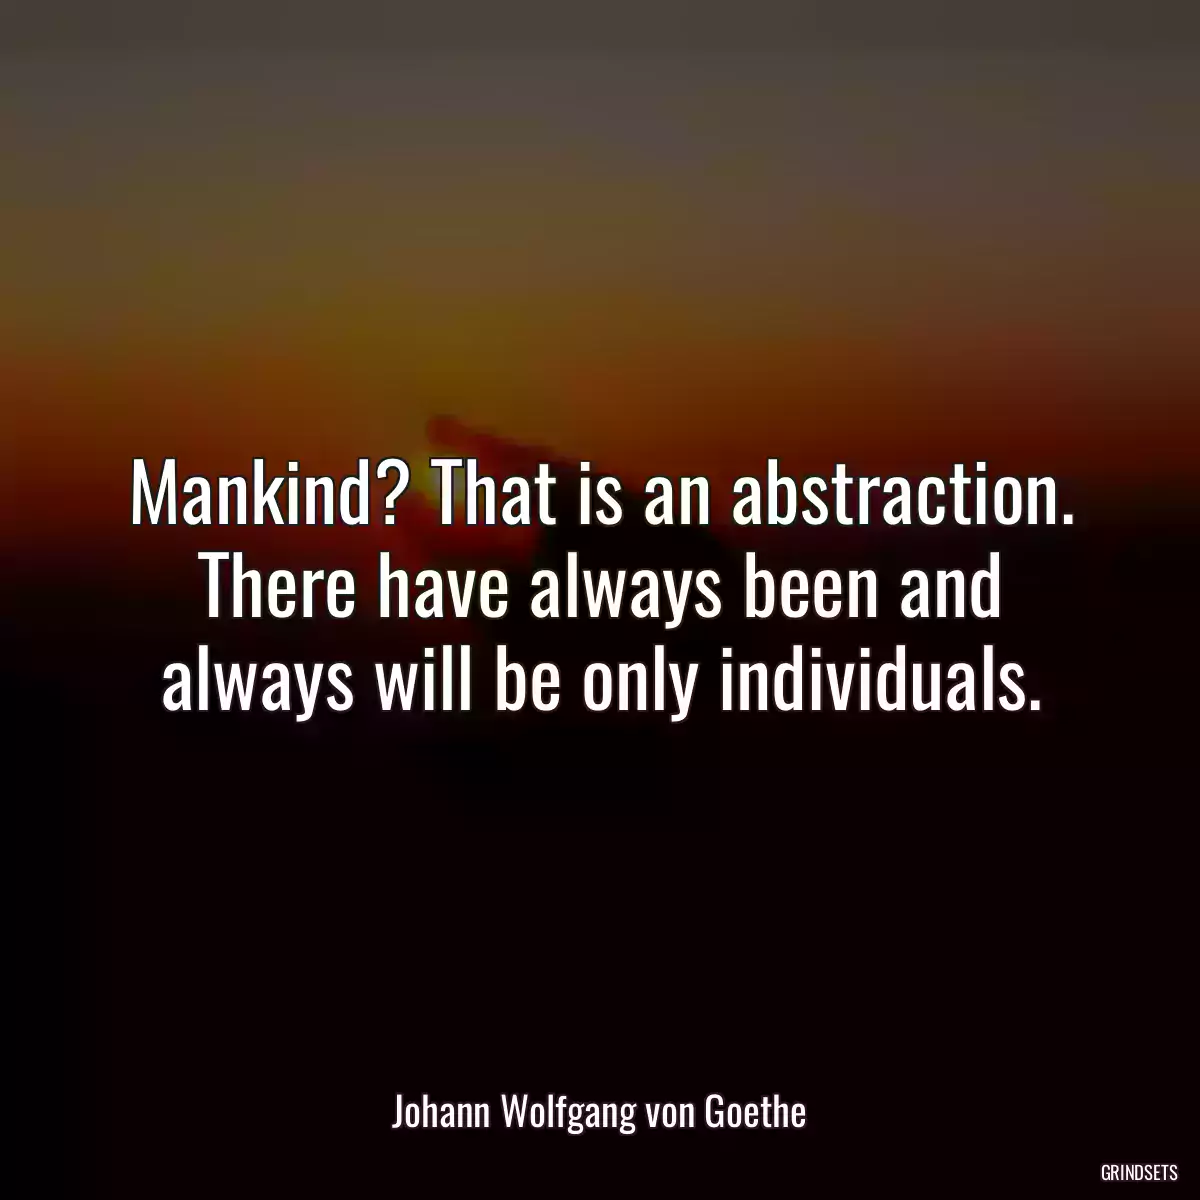 Mankind? That is an abstraction. There have always been and always will be only individuals.